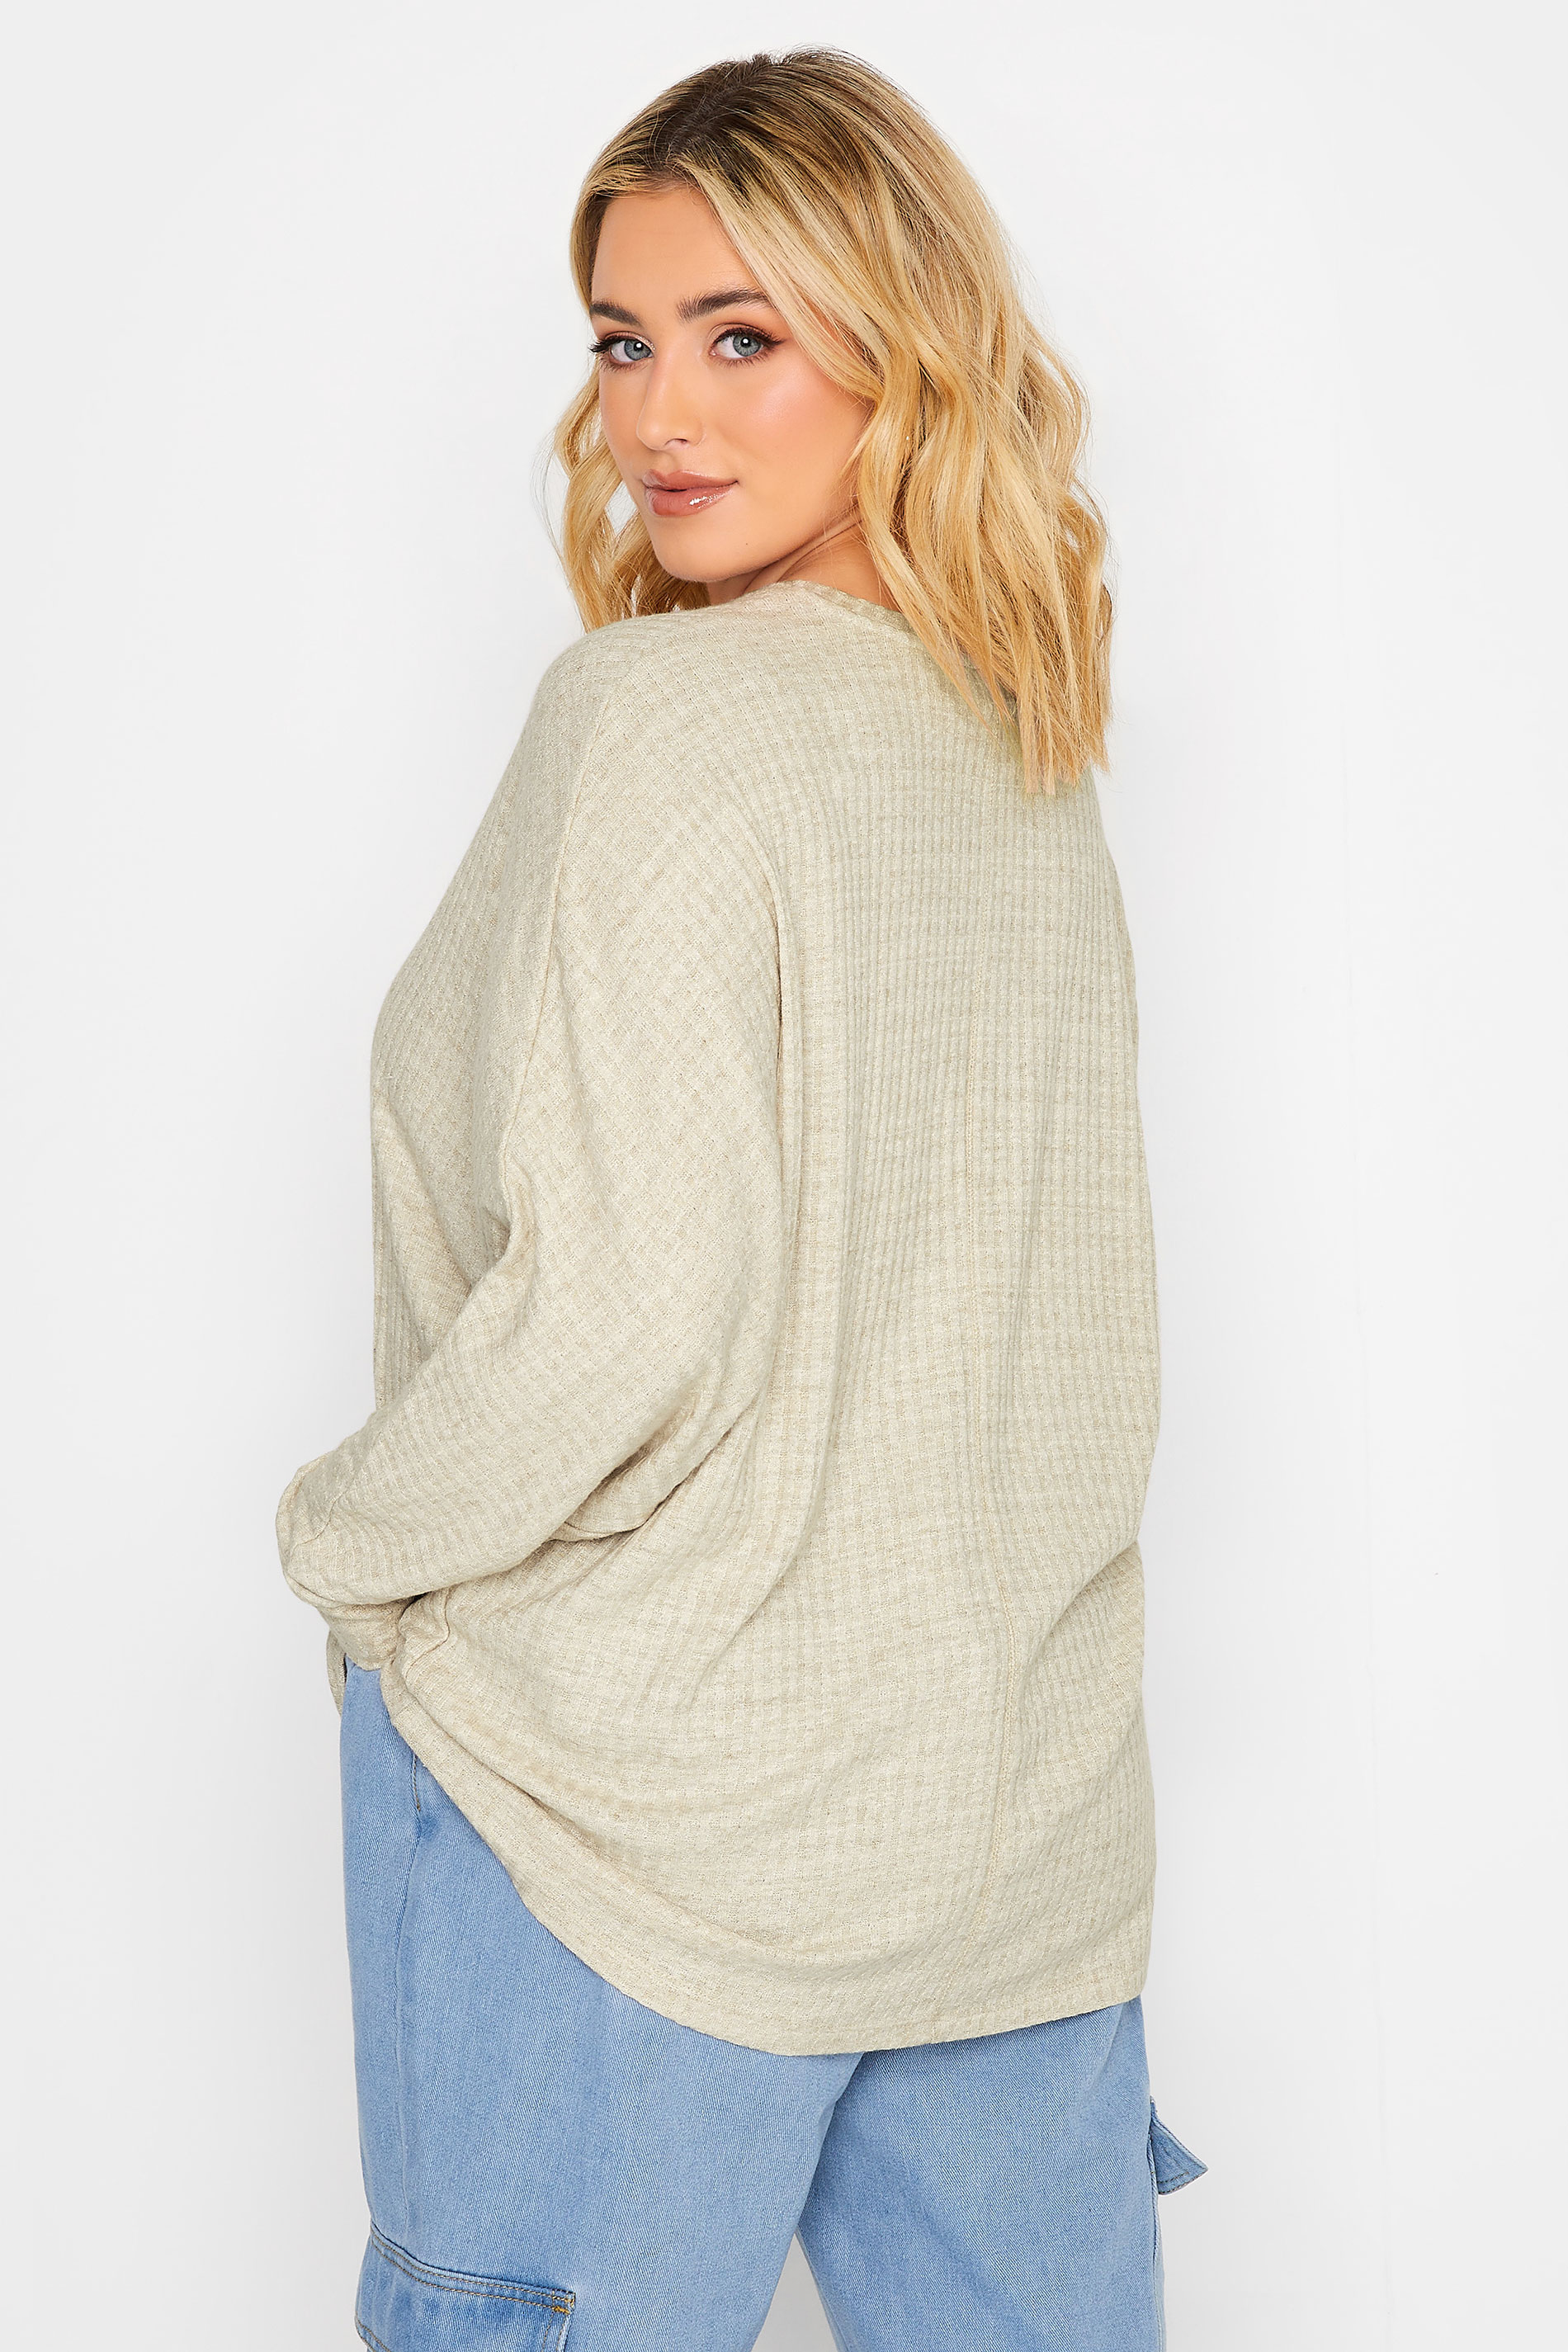 YOURS Plus Size Ivory White Soft Touch Ribbed Top | Yours Clothing 3